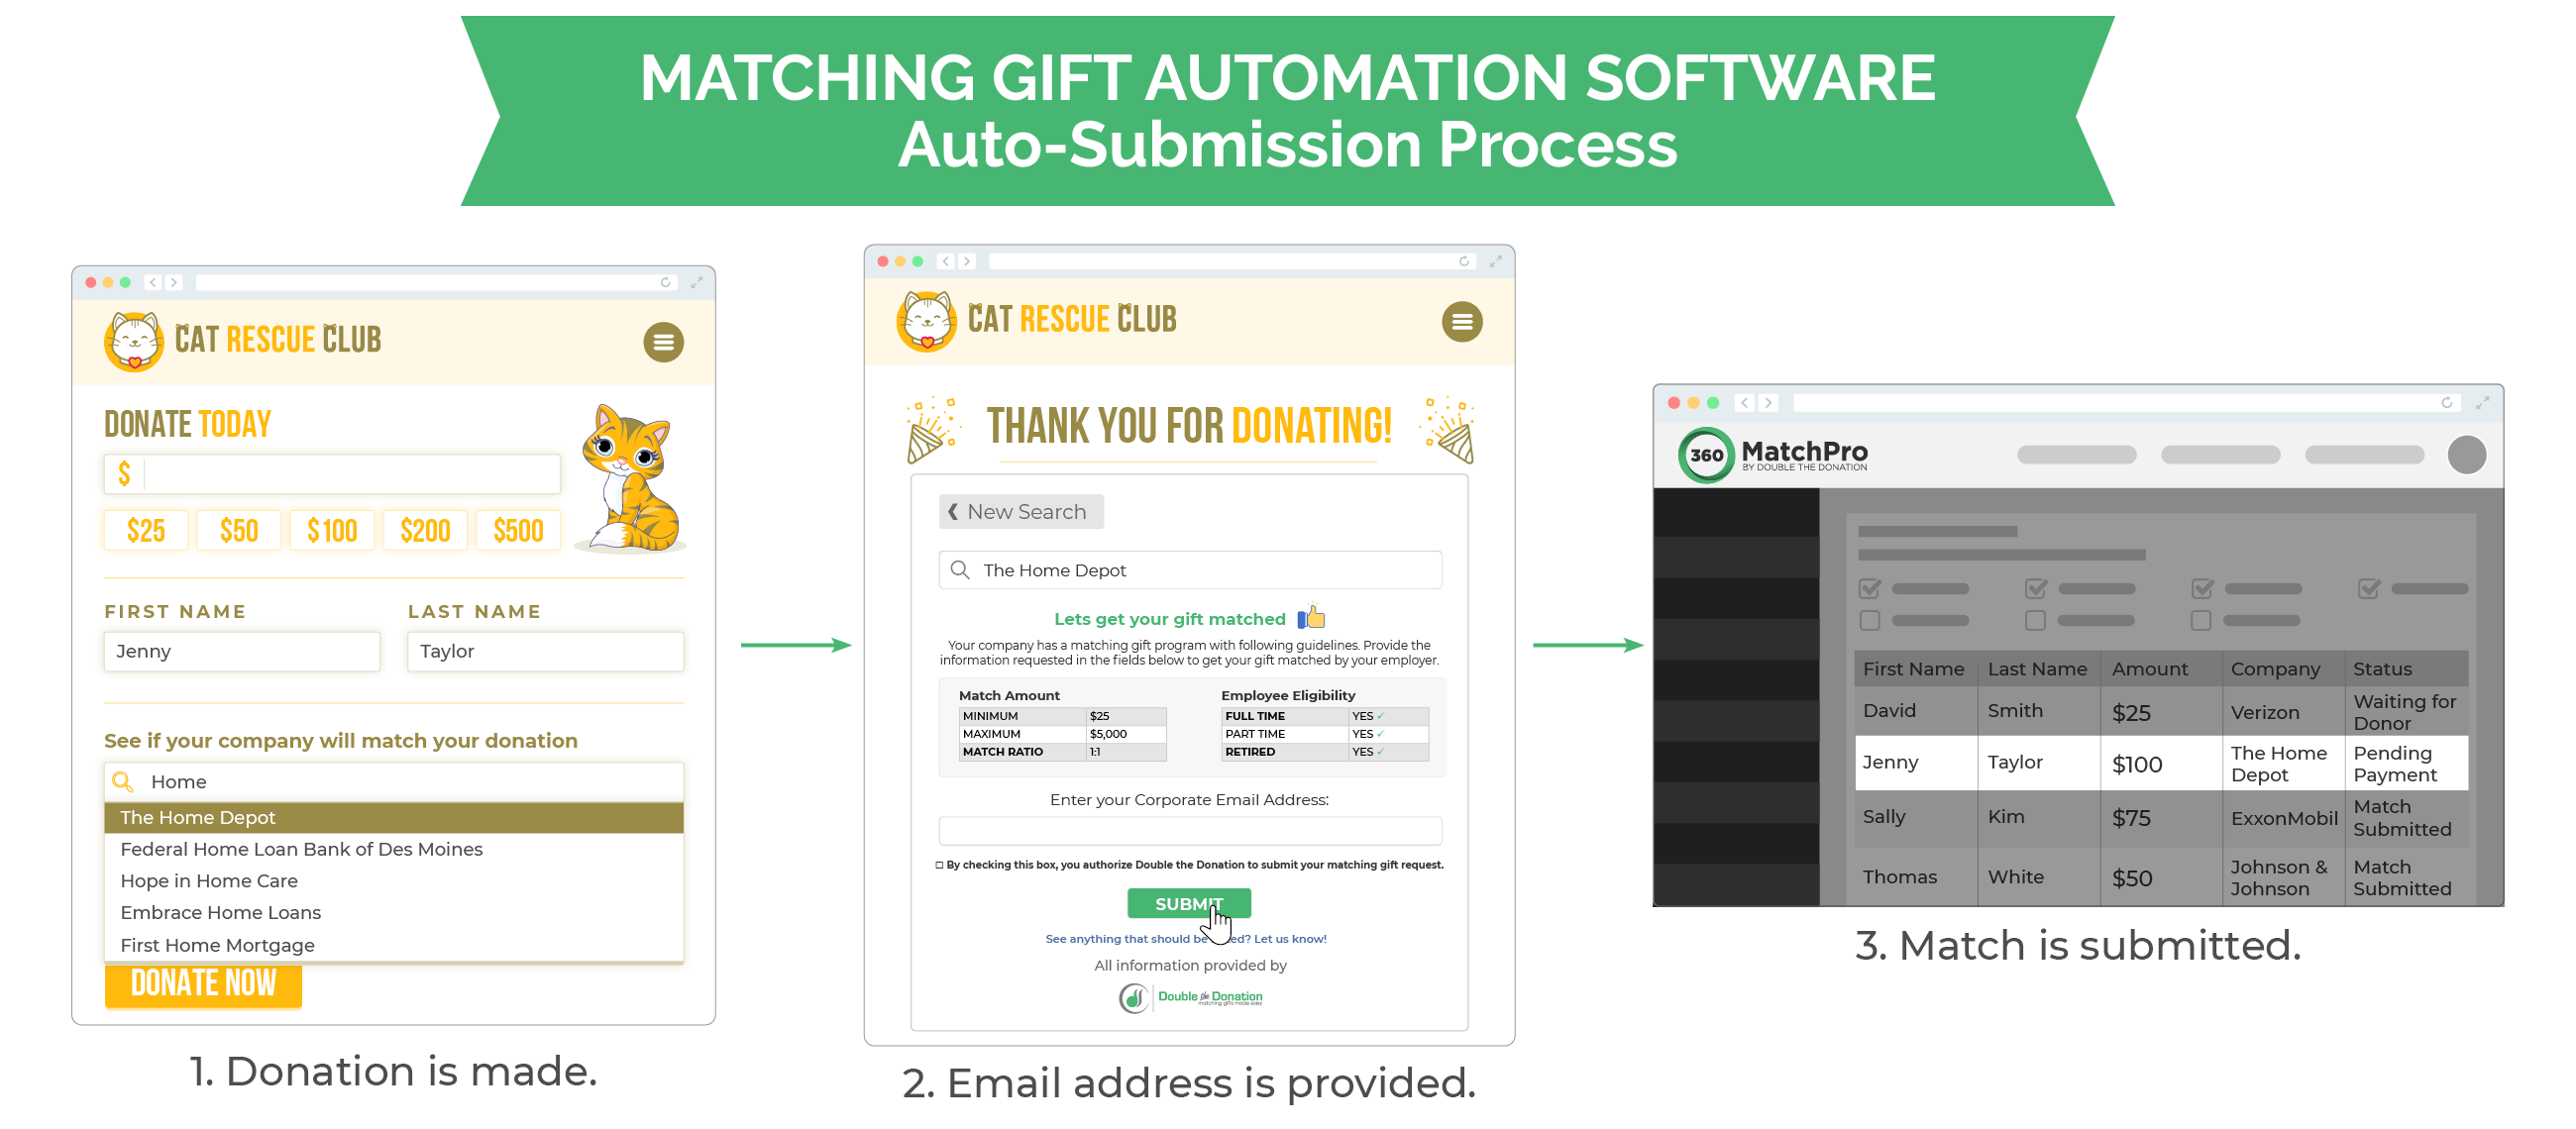 Matching gift database auto-submission process